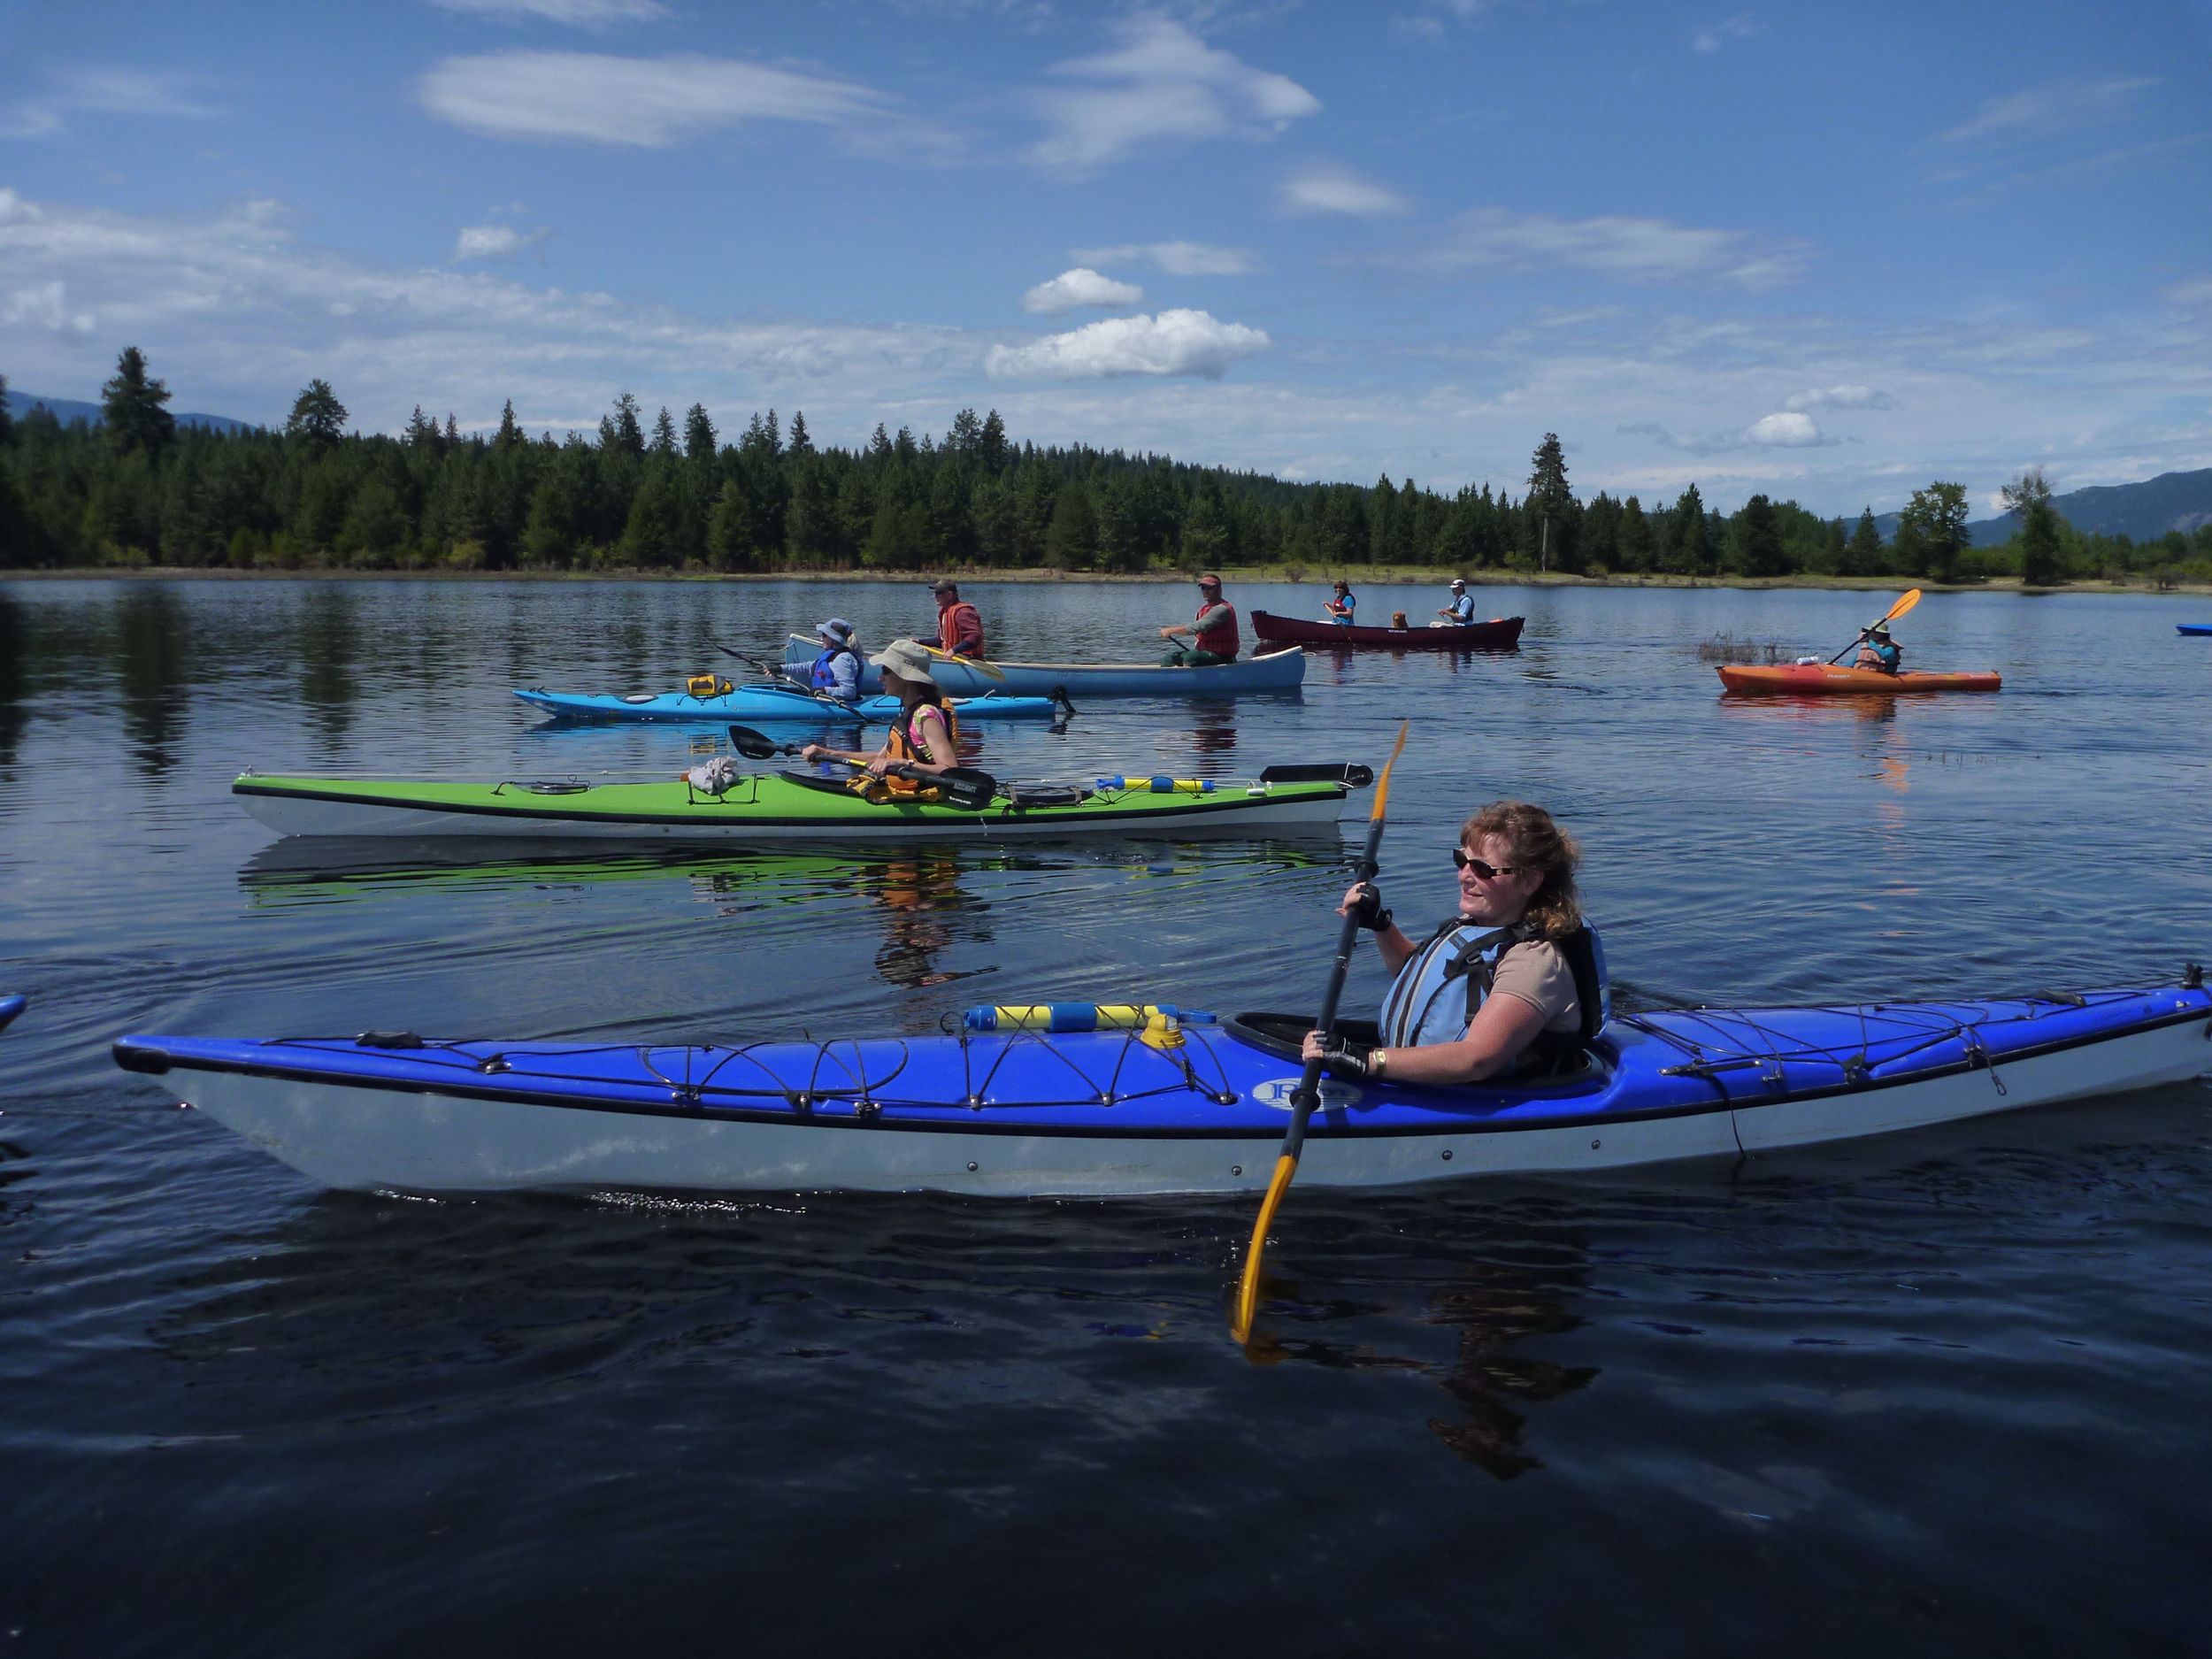 Paddling the Pend Oreille River - July 18, 2011 | The Spokesman-Review